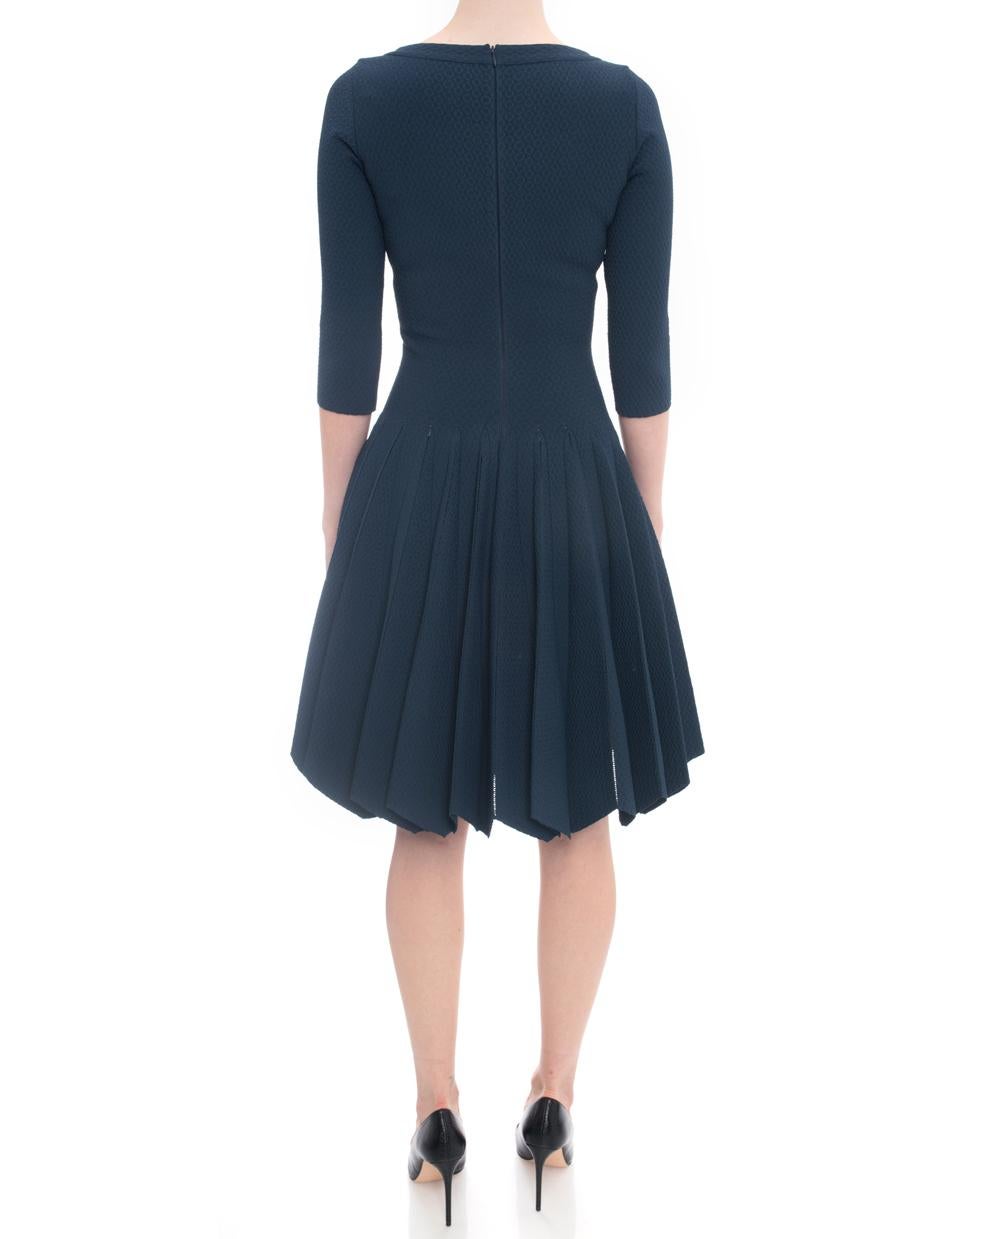 Alaia Prussian Blue Stretch Knit Fit and Flare Dress - 38 2